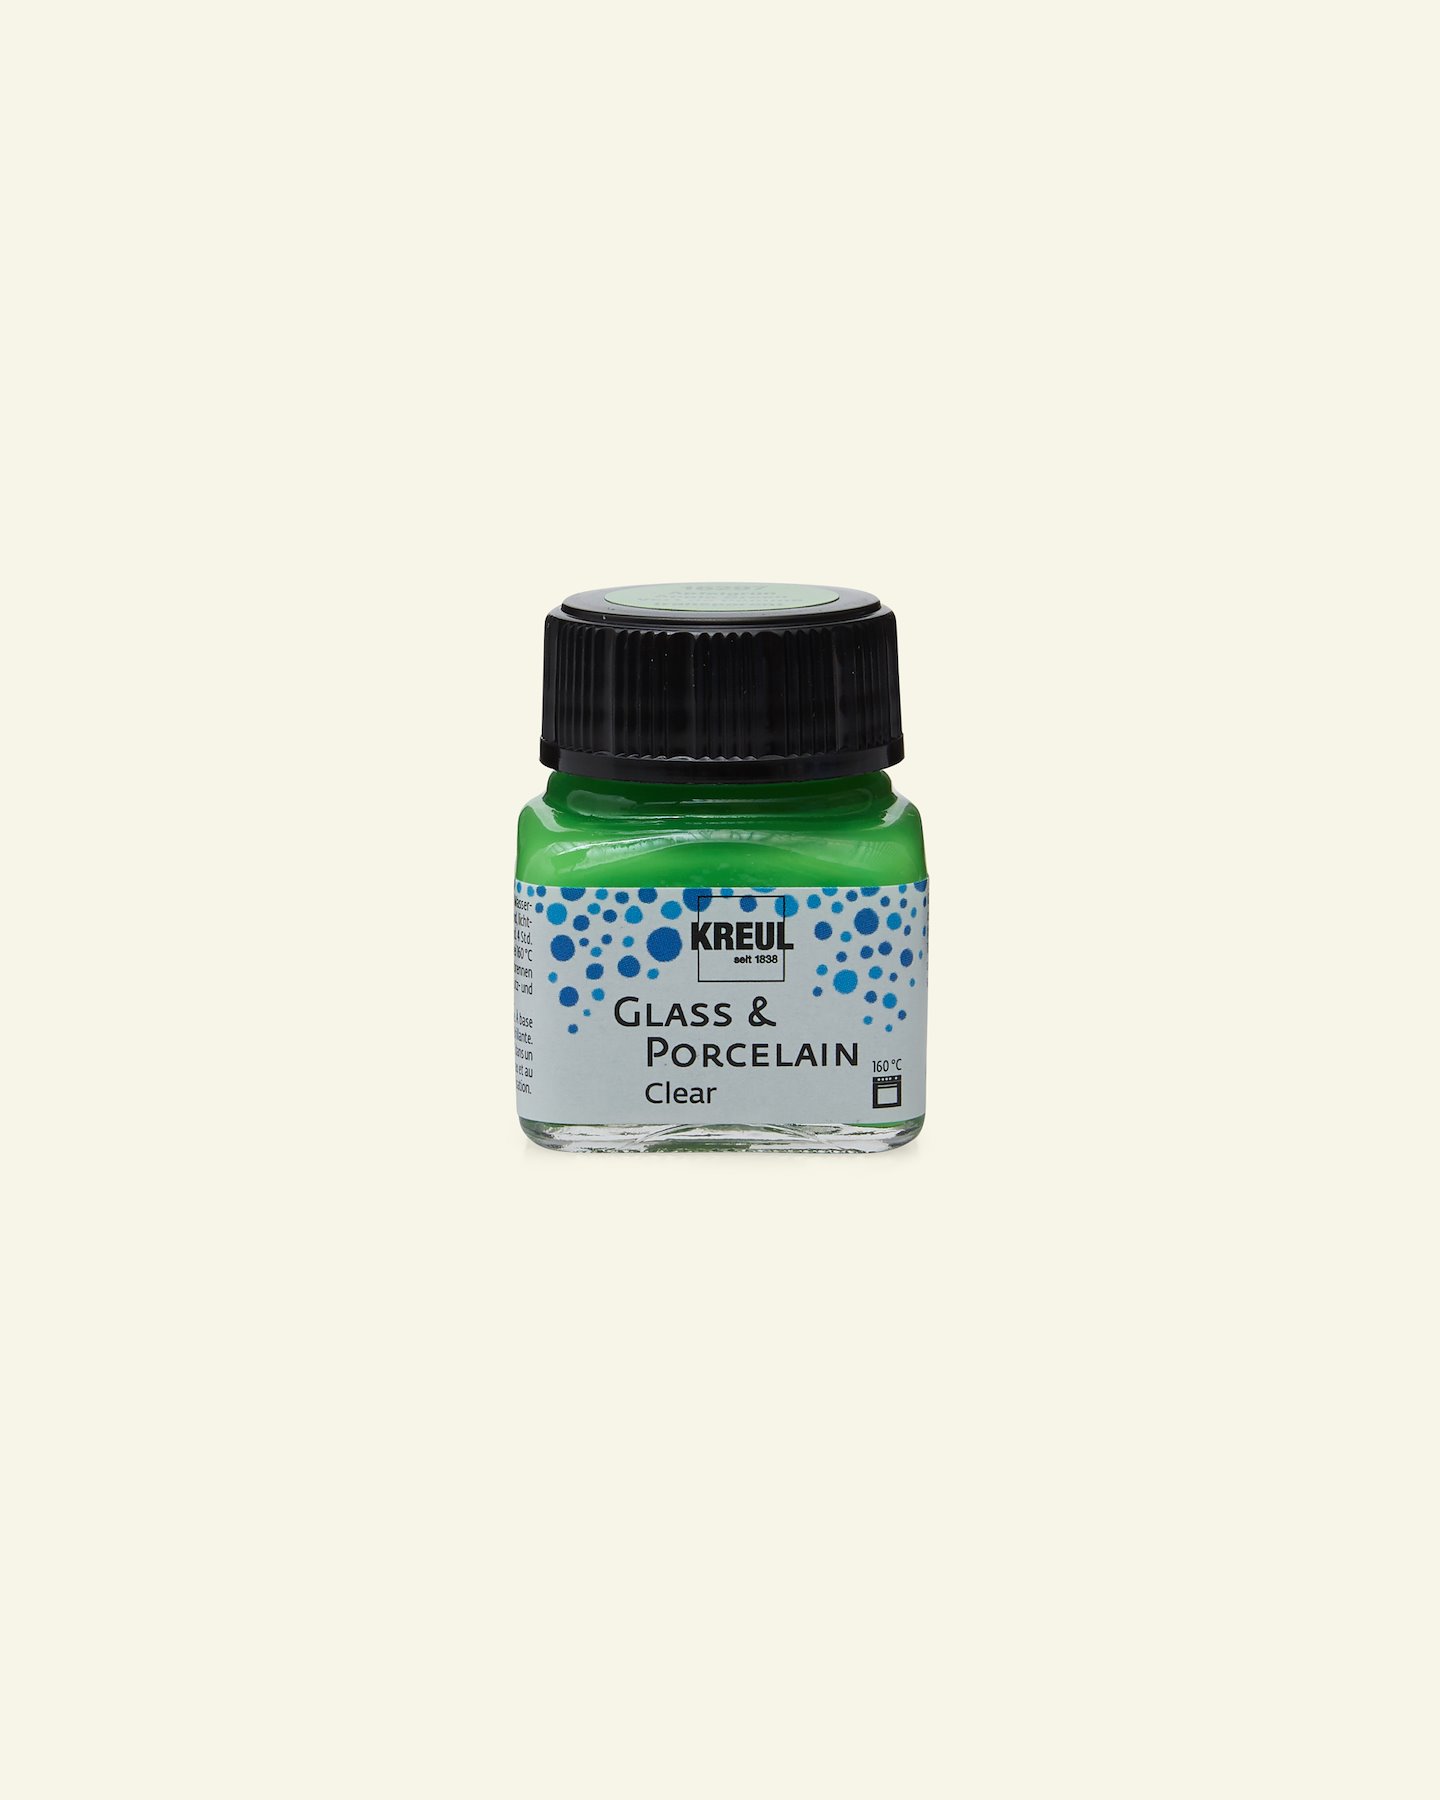 Glass&porcel. paint clear 20ml green 31292_pack